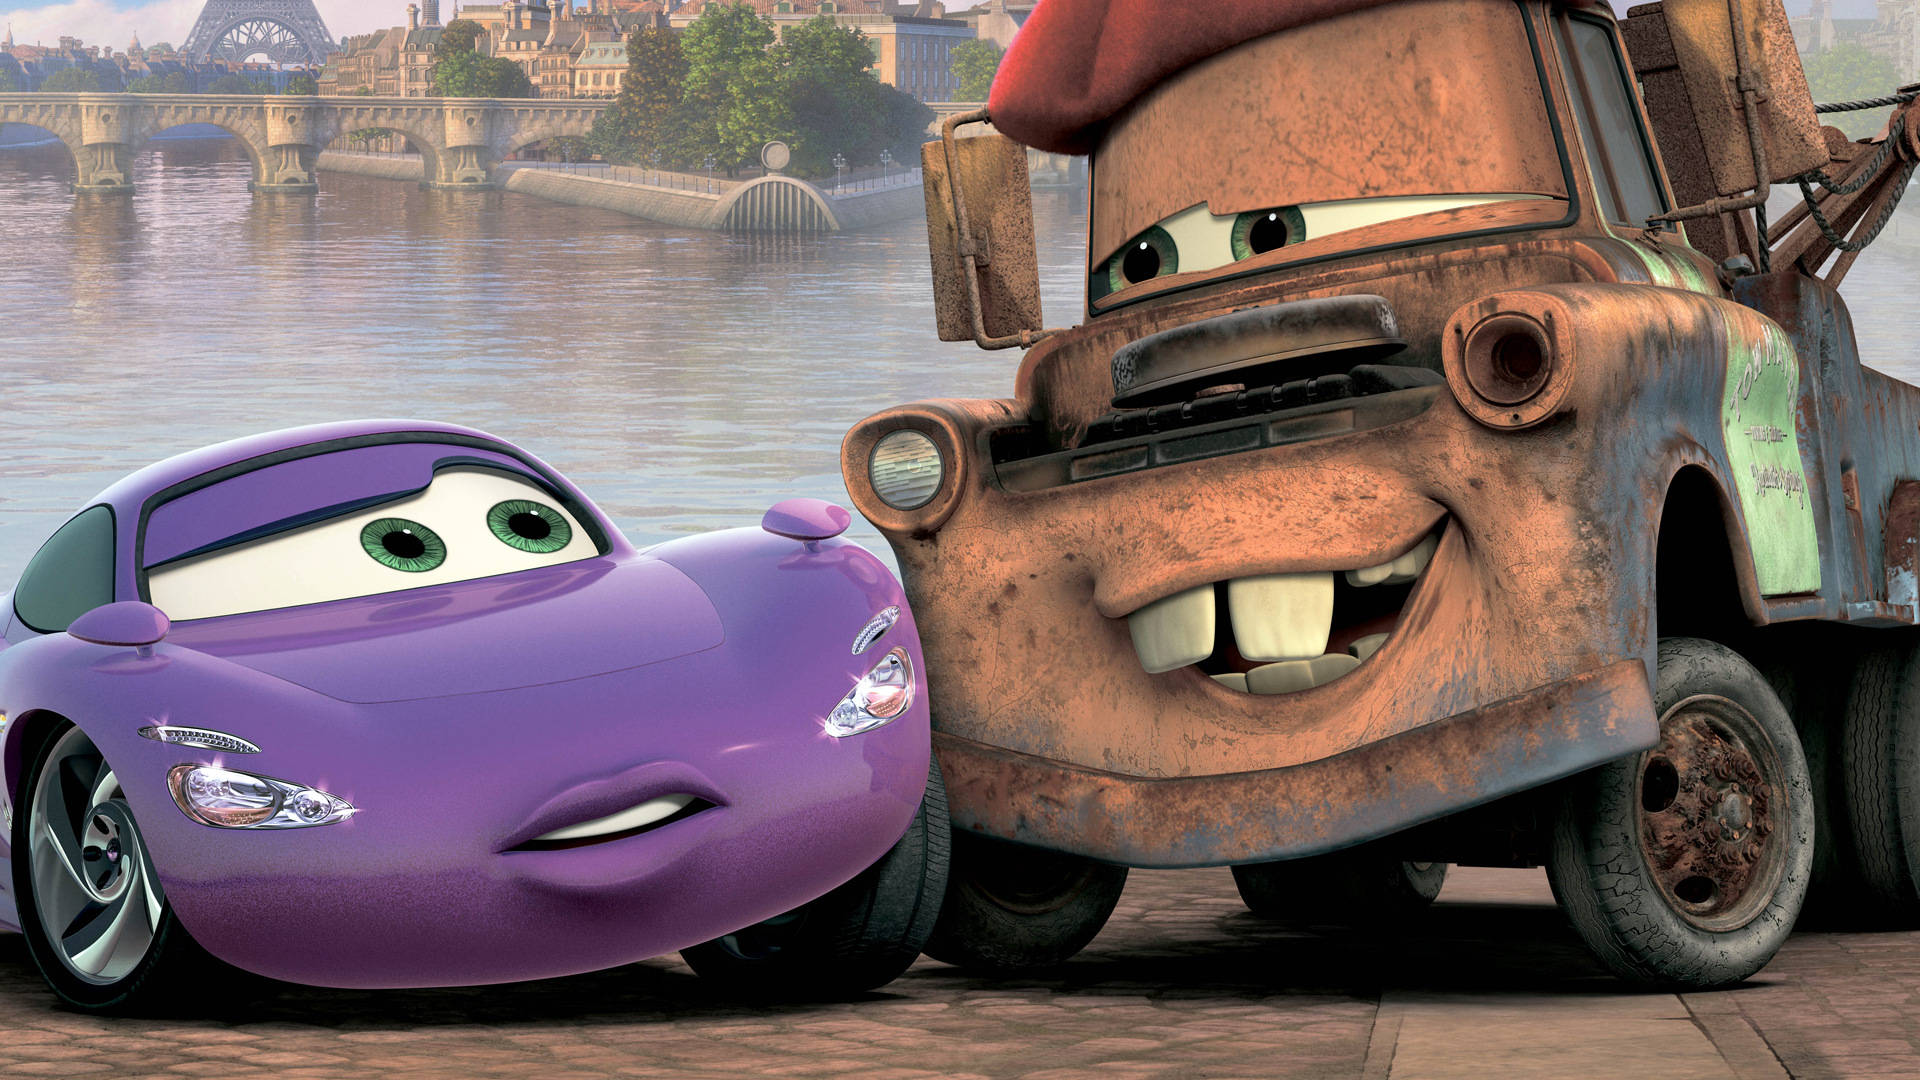 Holley And Mater Cars 2 Picture